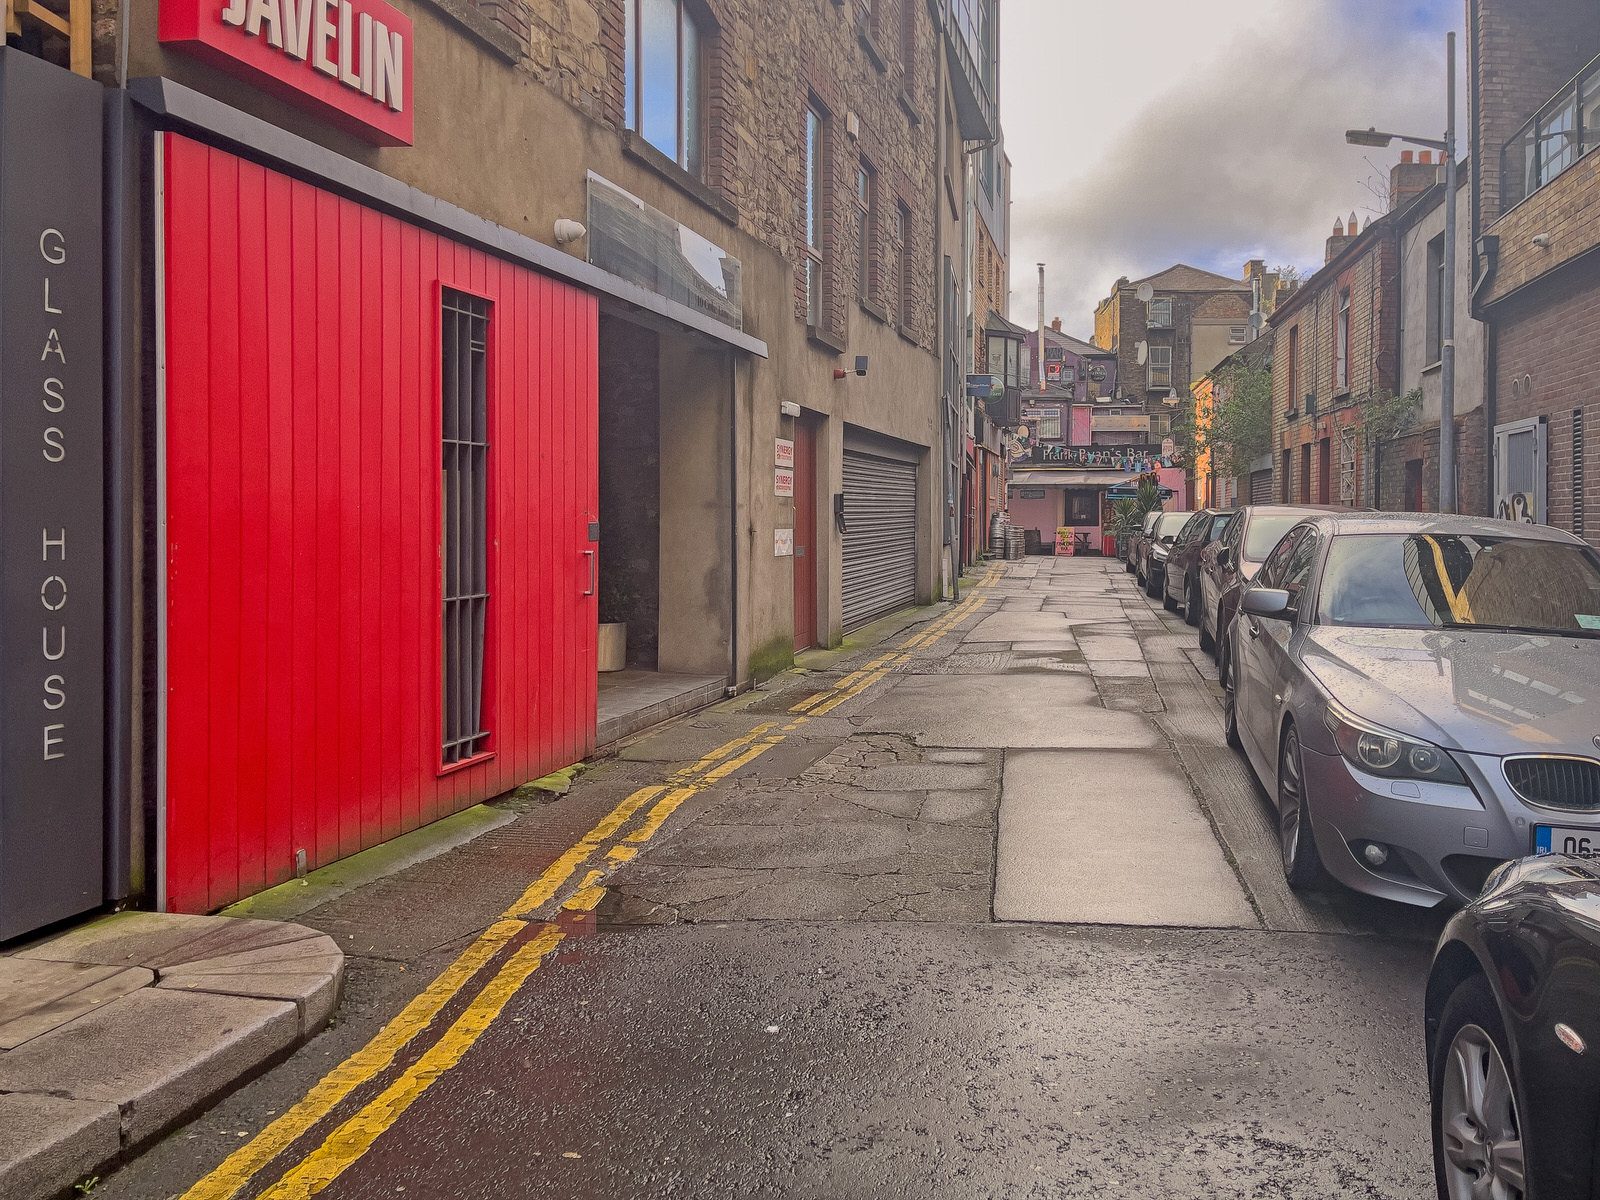 ANOTHER VISIT TO COKE LANE [SMITHFIELD AREA OF DUBLIN]-228133-1